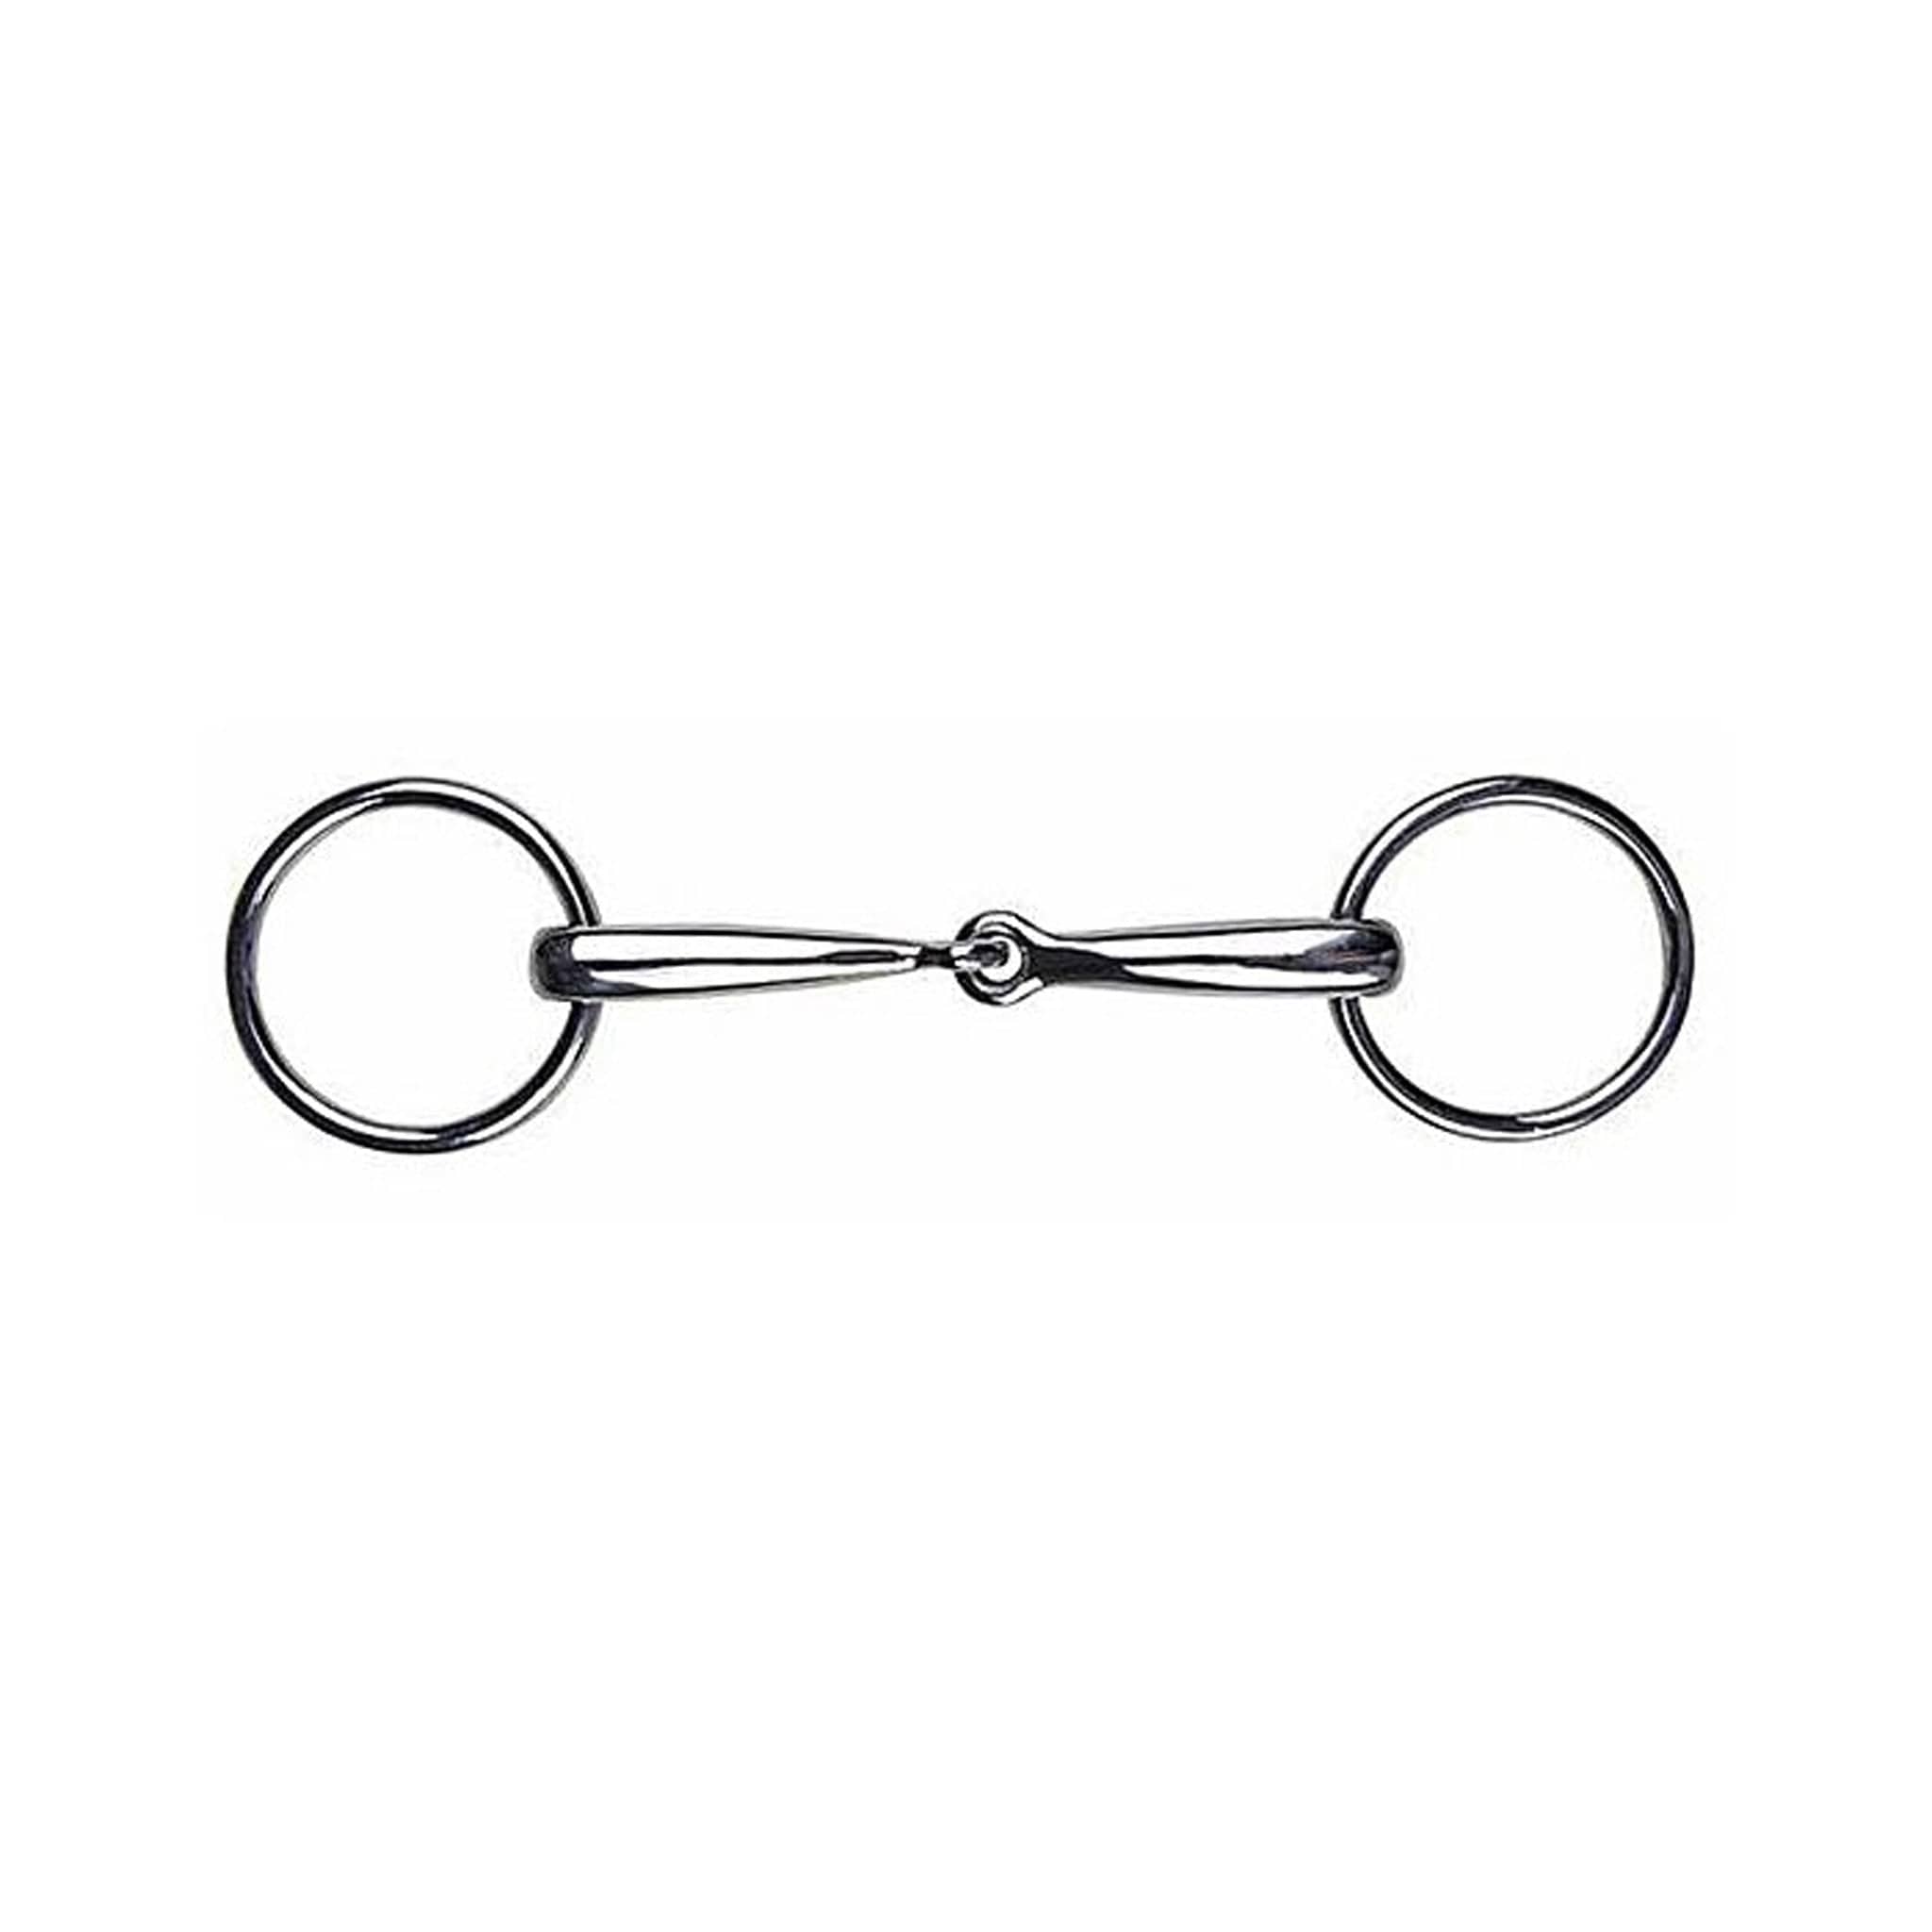 HKM Stainless Steel 14mm Loose Ring Snaffle 9882